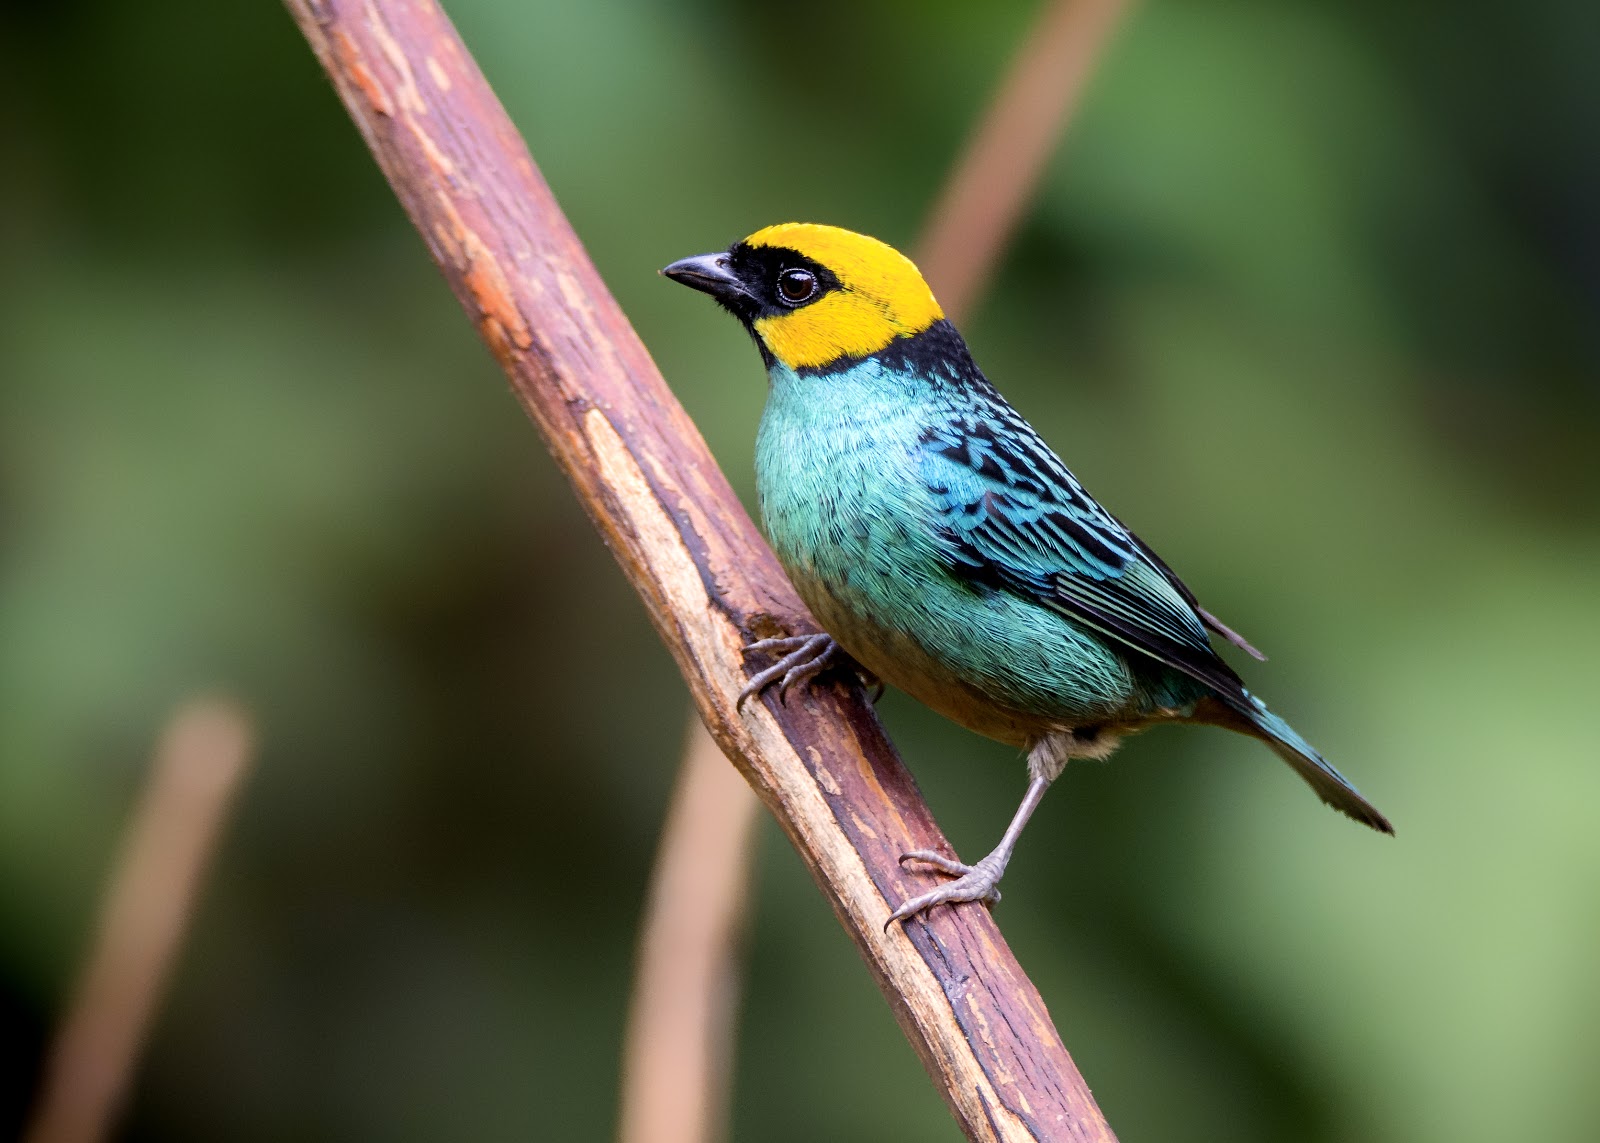 Bird tourism in Colombia takes flight — as threats to vital habitats intensify